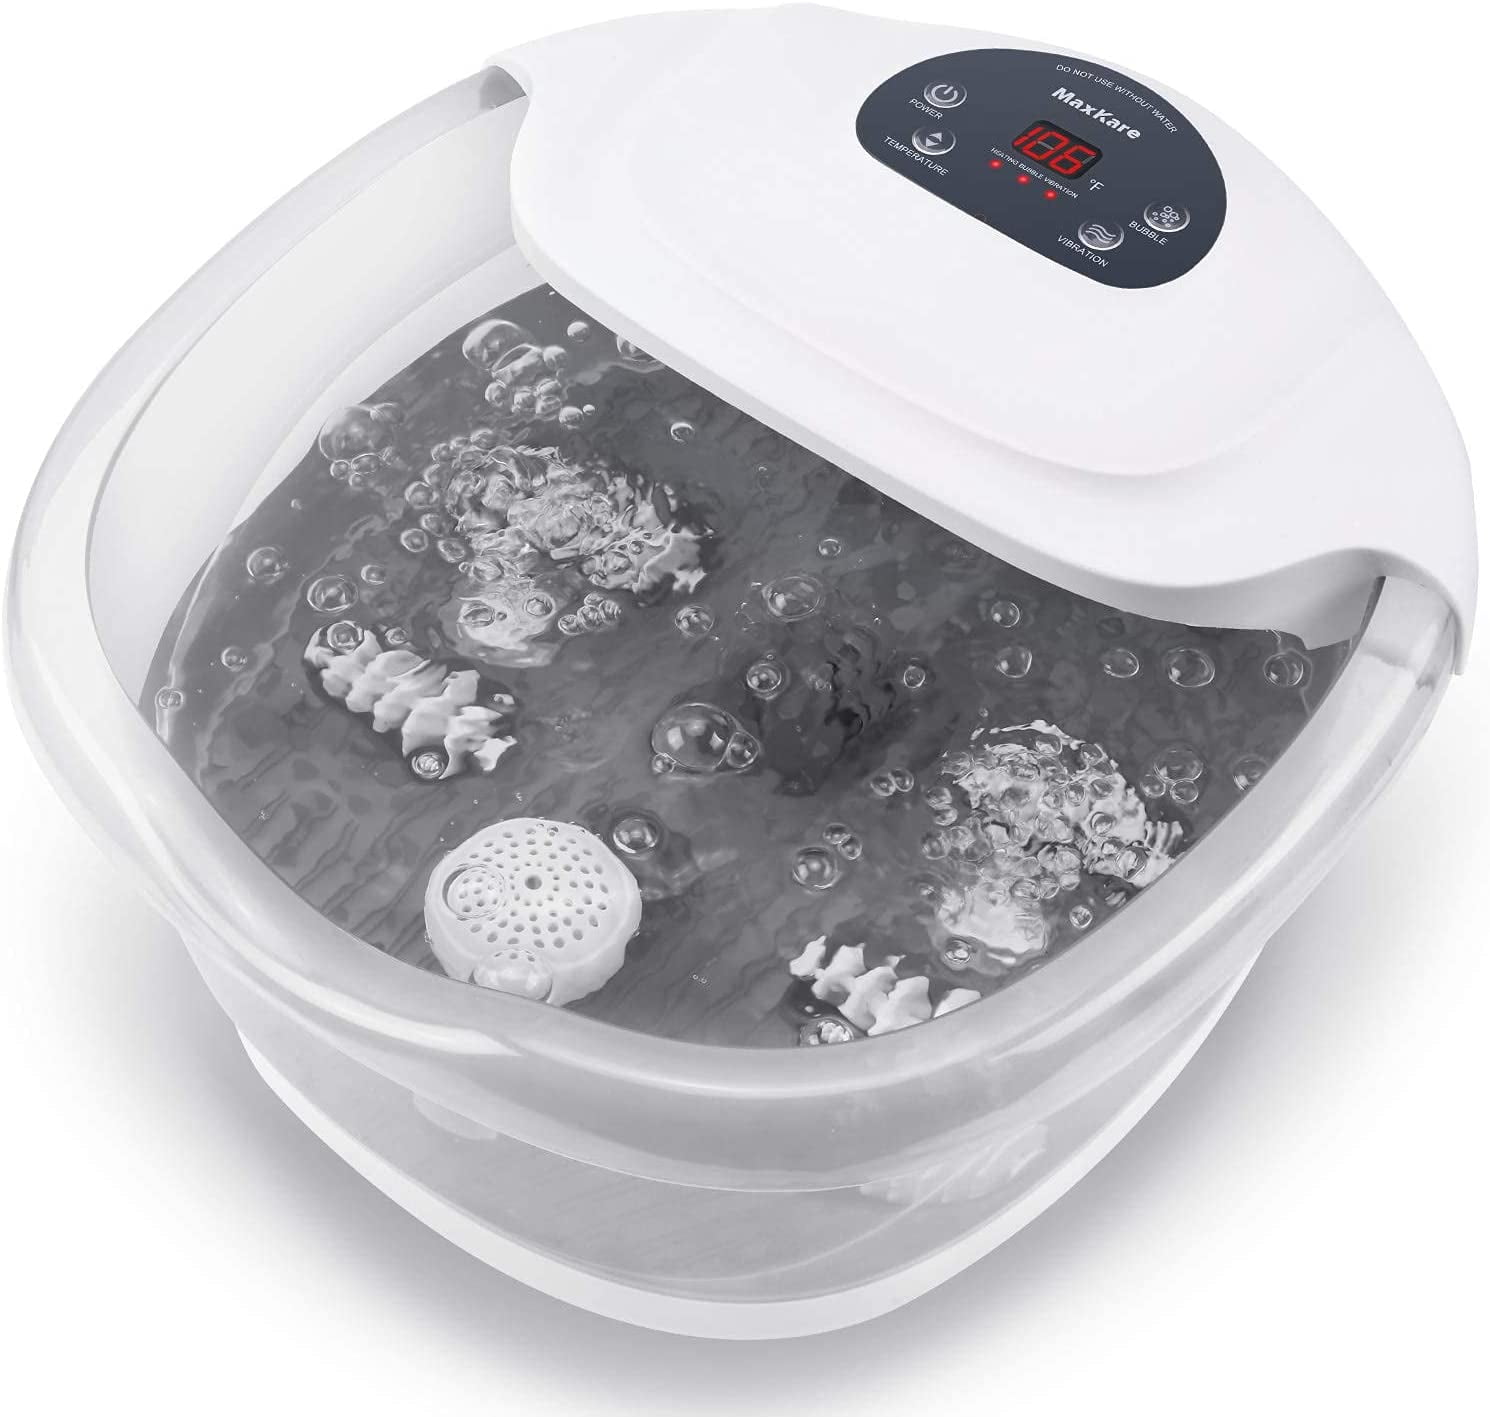 Foot Spa/Bath Soaker with Heat Bubbles Vibration and Massage Pedicure Manually Massager